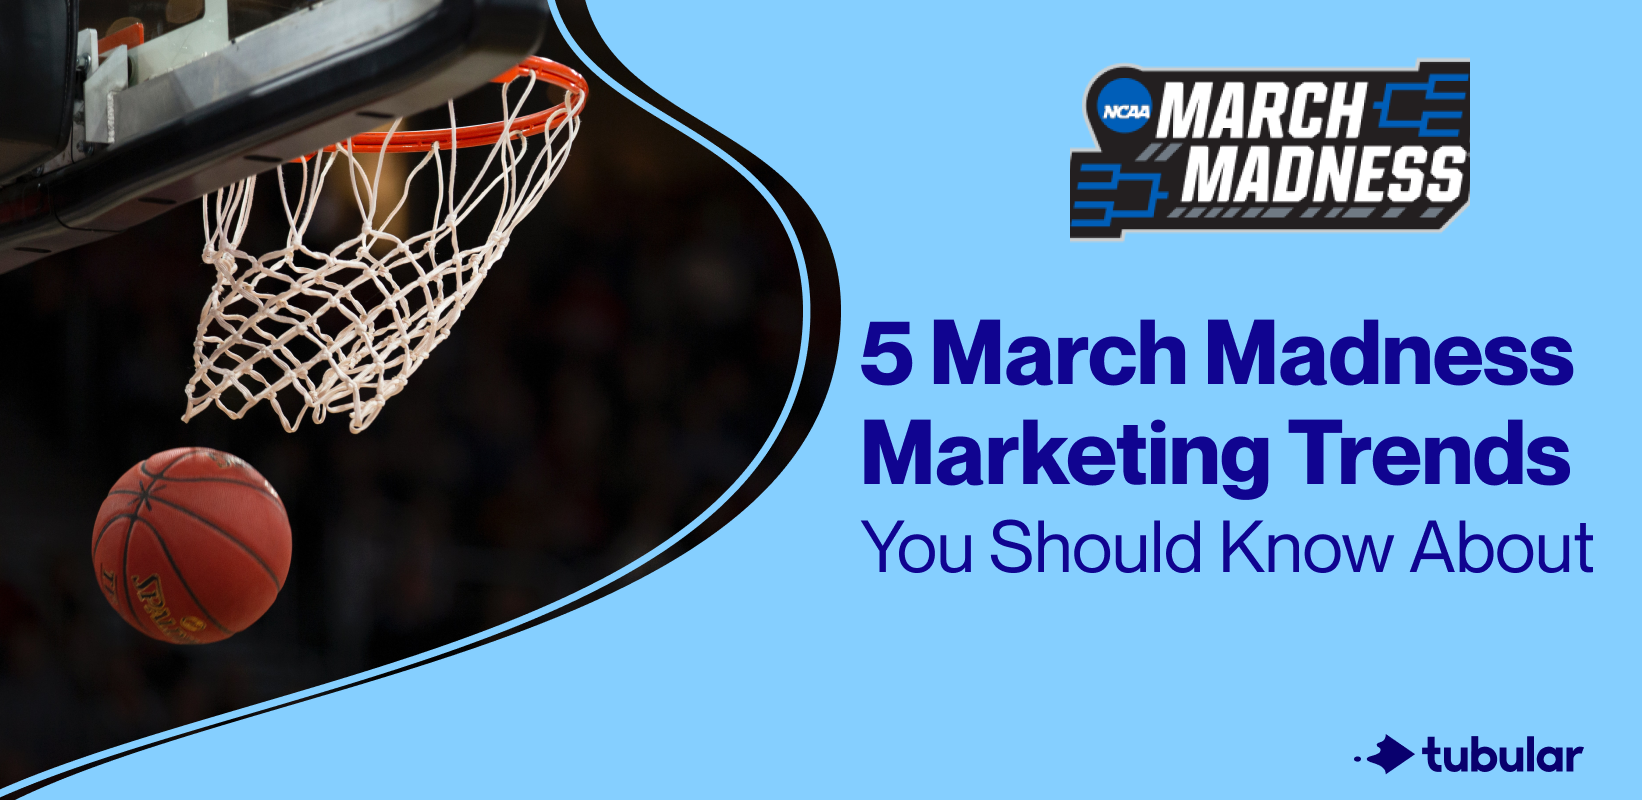 5 March Madness Marketing Trends You Should Know About Tubular Labs